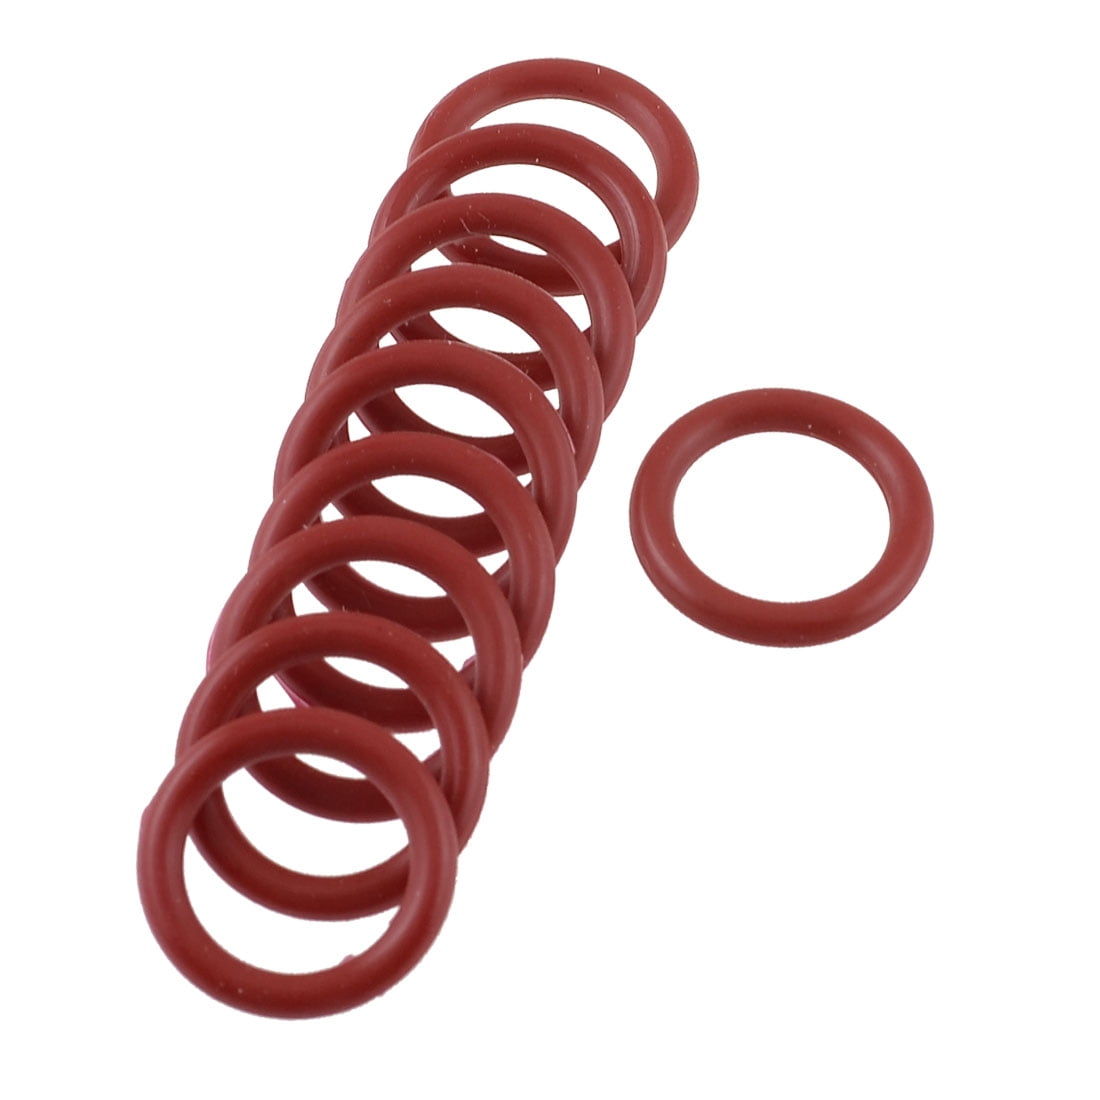 10pcs 17mm Outside Dia 2.5mm Thickness Rubber Oil Filter Seal Gasket O Rings Red